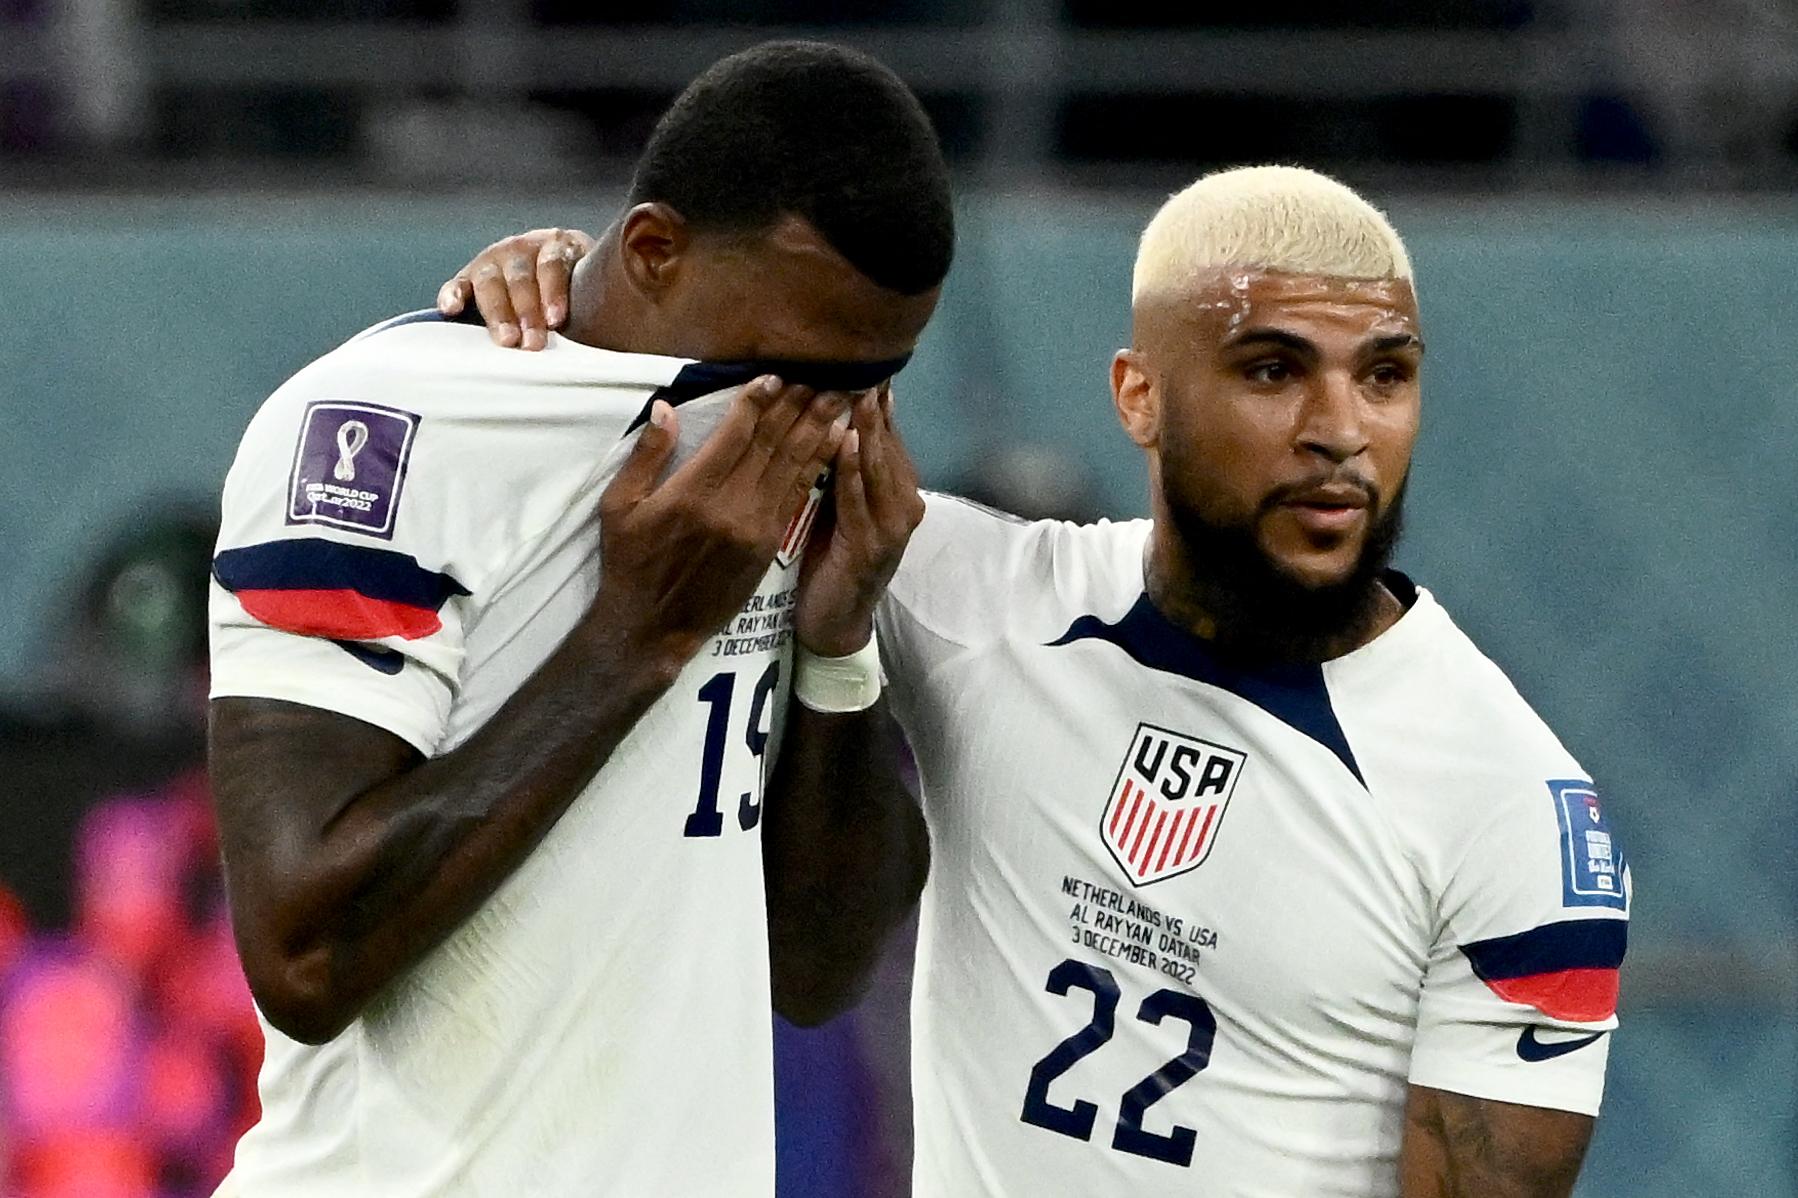 Wright wipes his face with his jersey and Yedlin wraps his arm around him